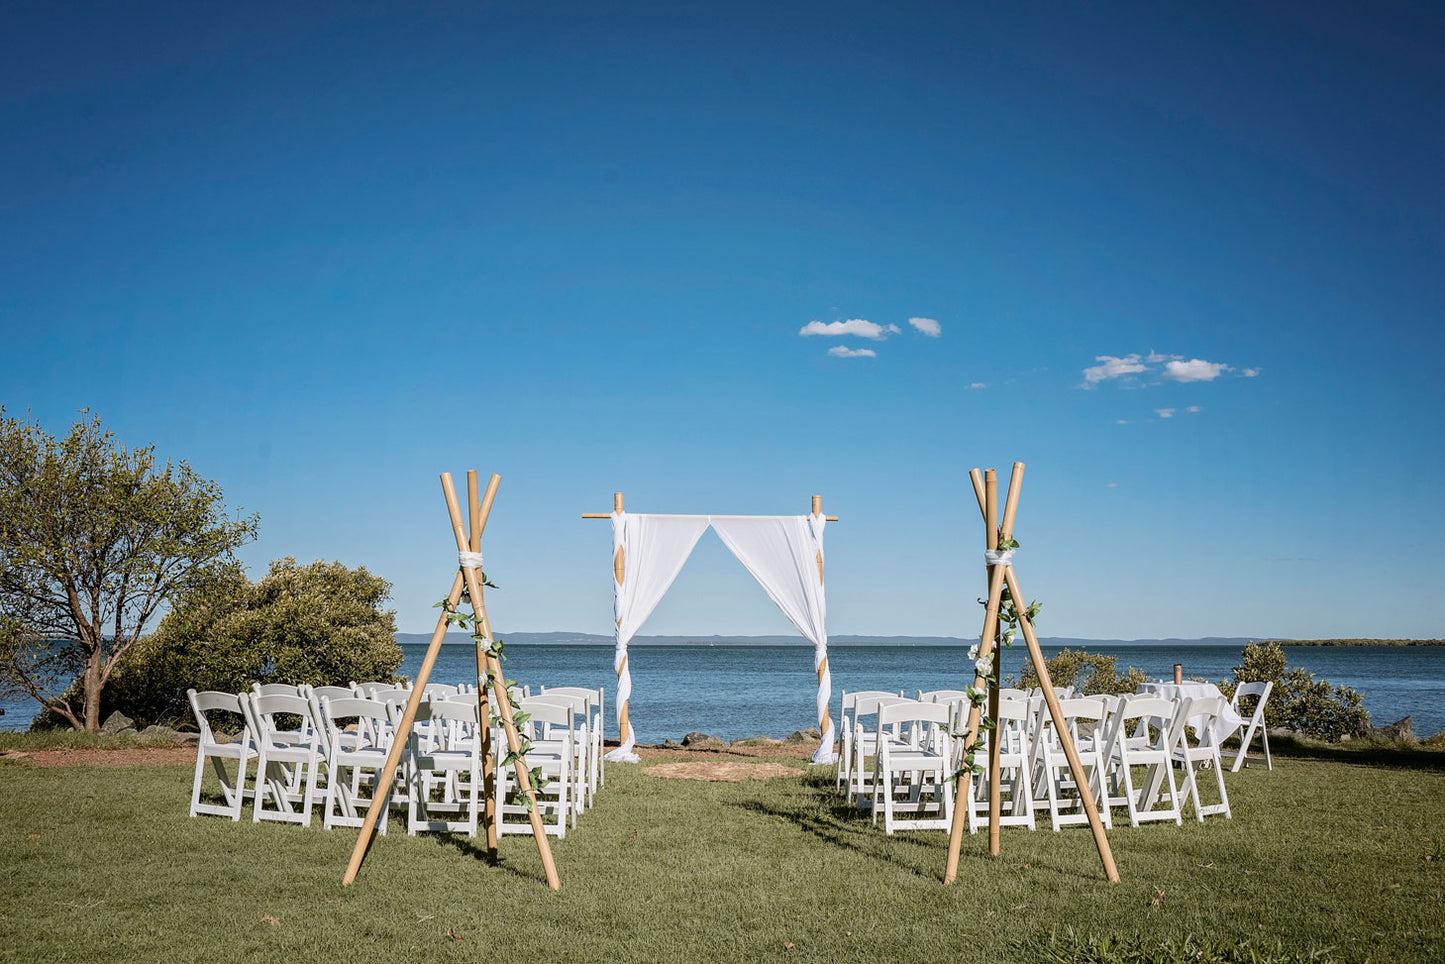 Elope (ceremony only) with Pop Up Weddings Bayside